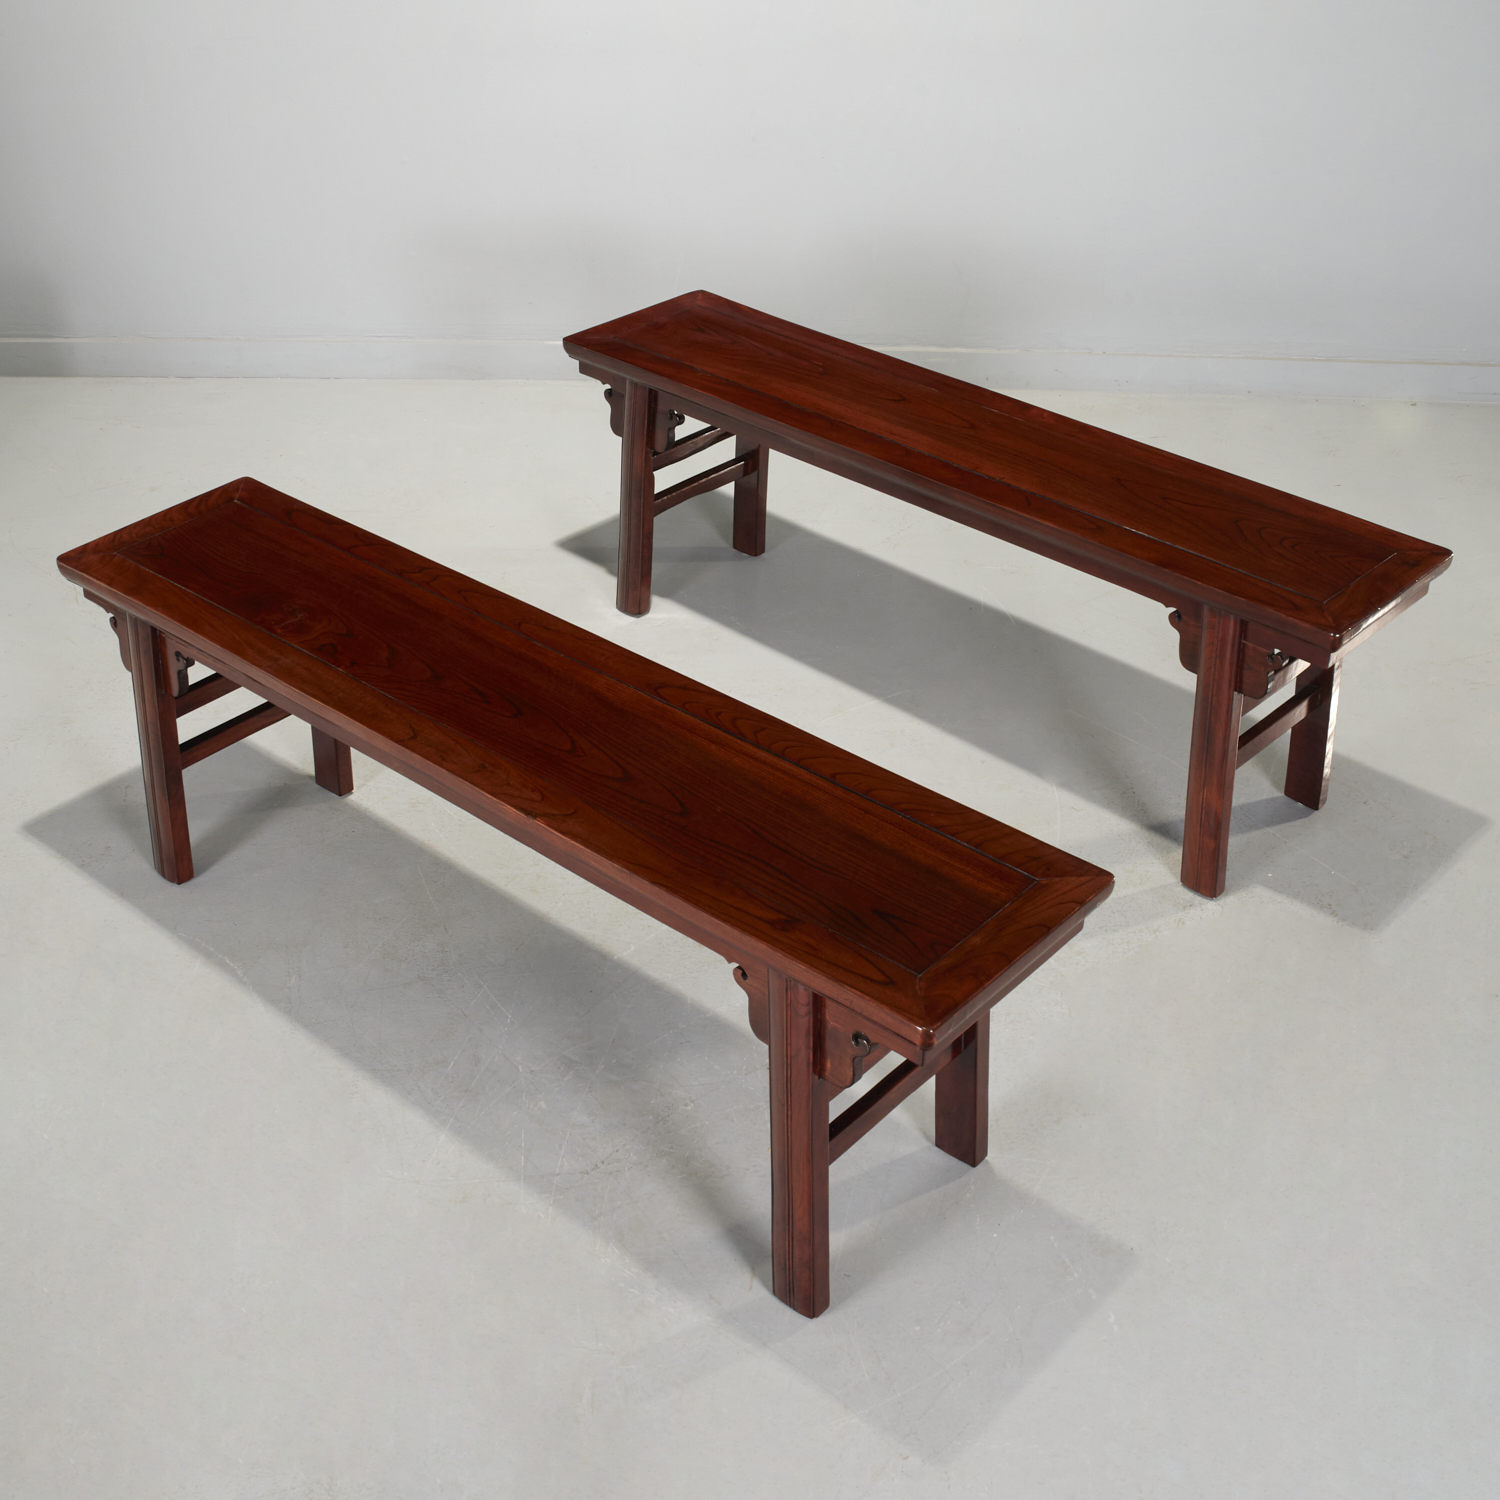 PAIR CHINESE HARDWOOD LONG BENCHES 29d33d